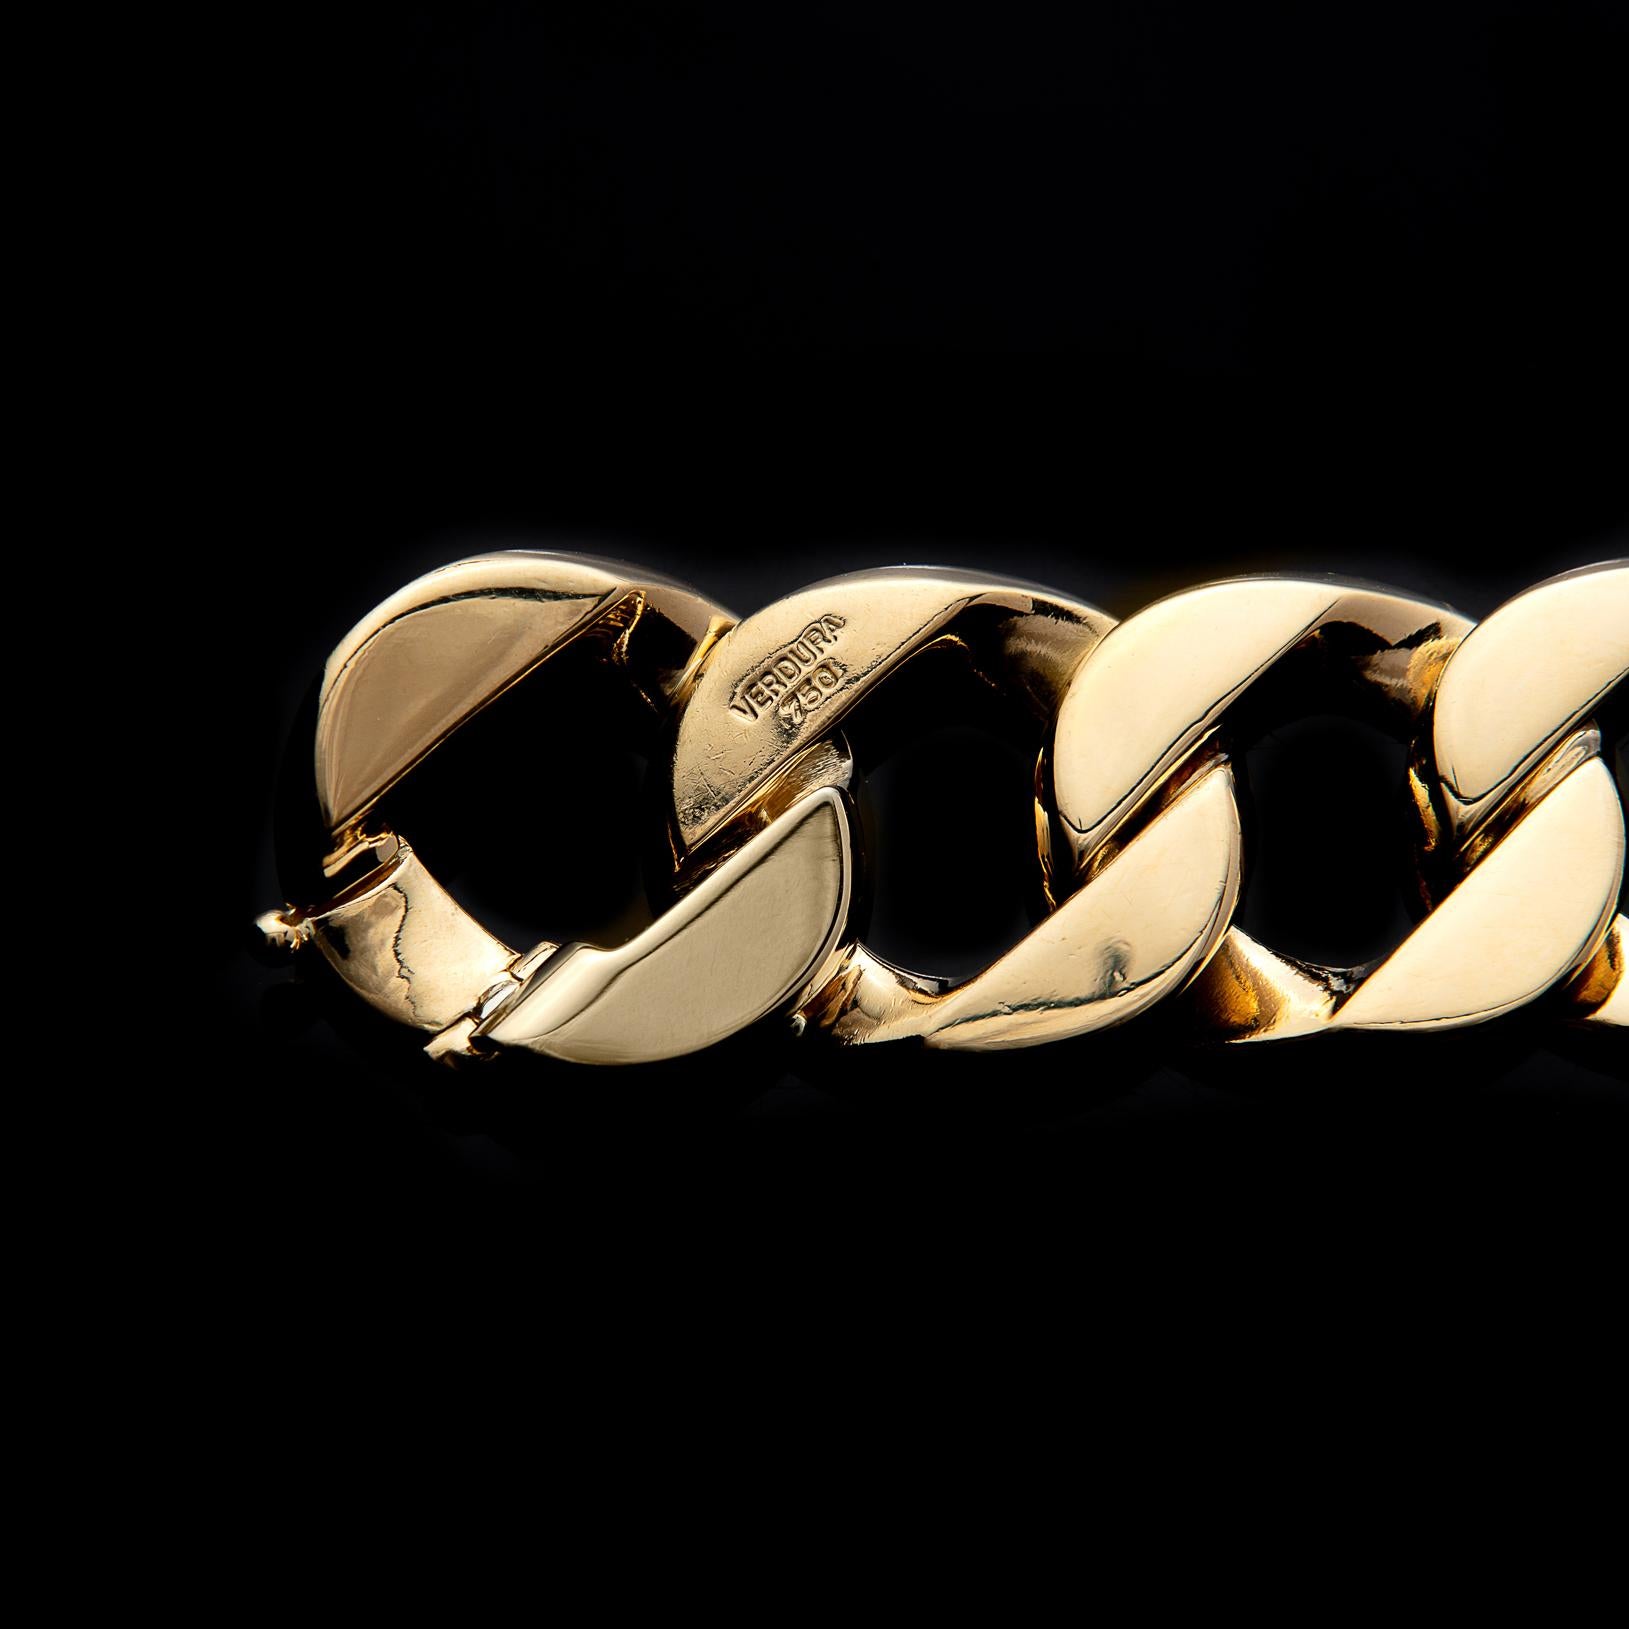 Made famous by Greta Garbo in 1941, as she was rarely seen without the signature gold links on each wrist, today modern style icons have adopted the classic link as a staple in their own wardrobes.The 18k gold curb link bracelet measures 7 3/4